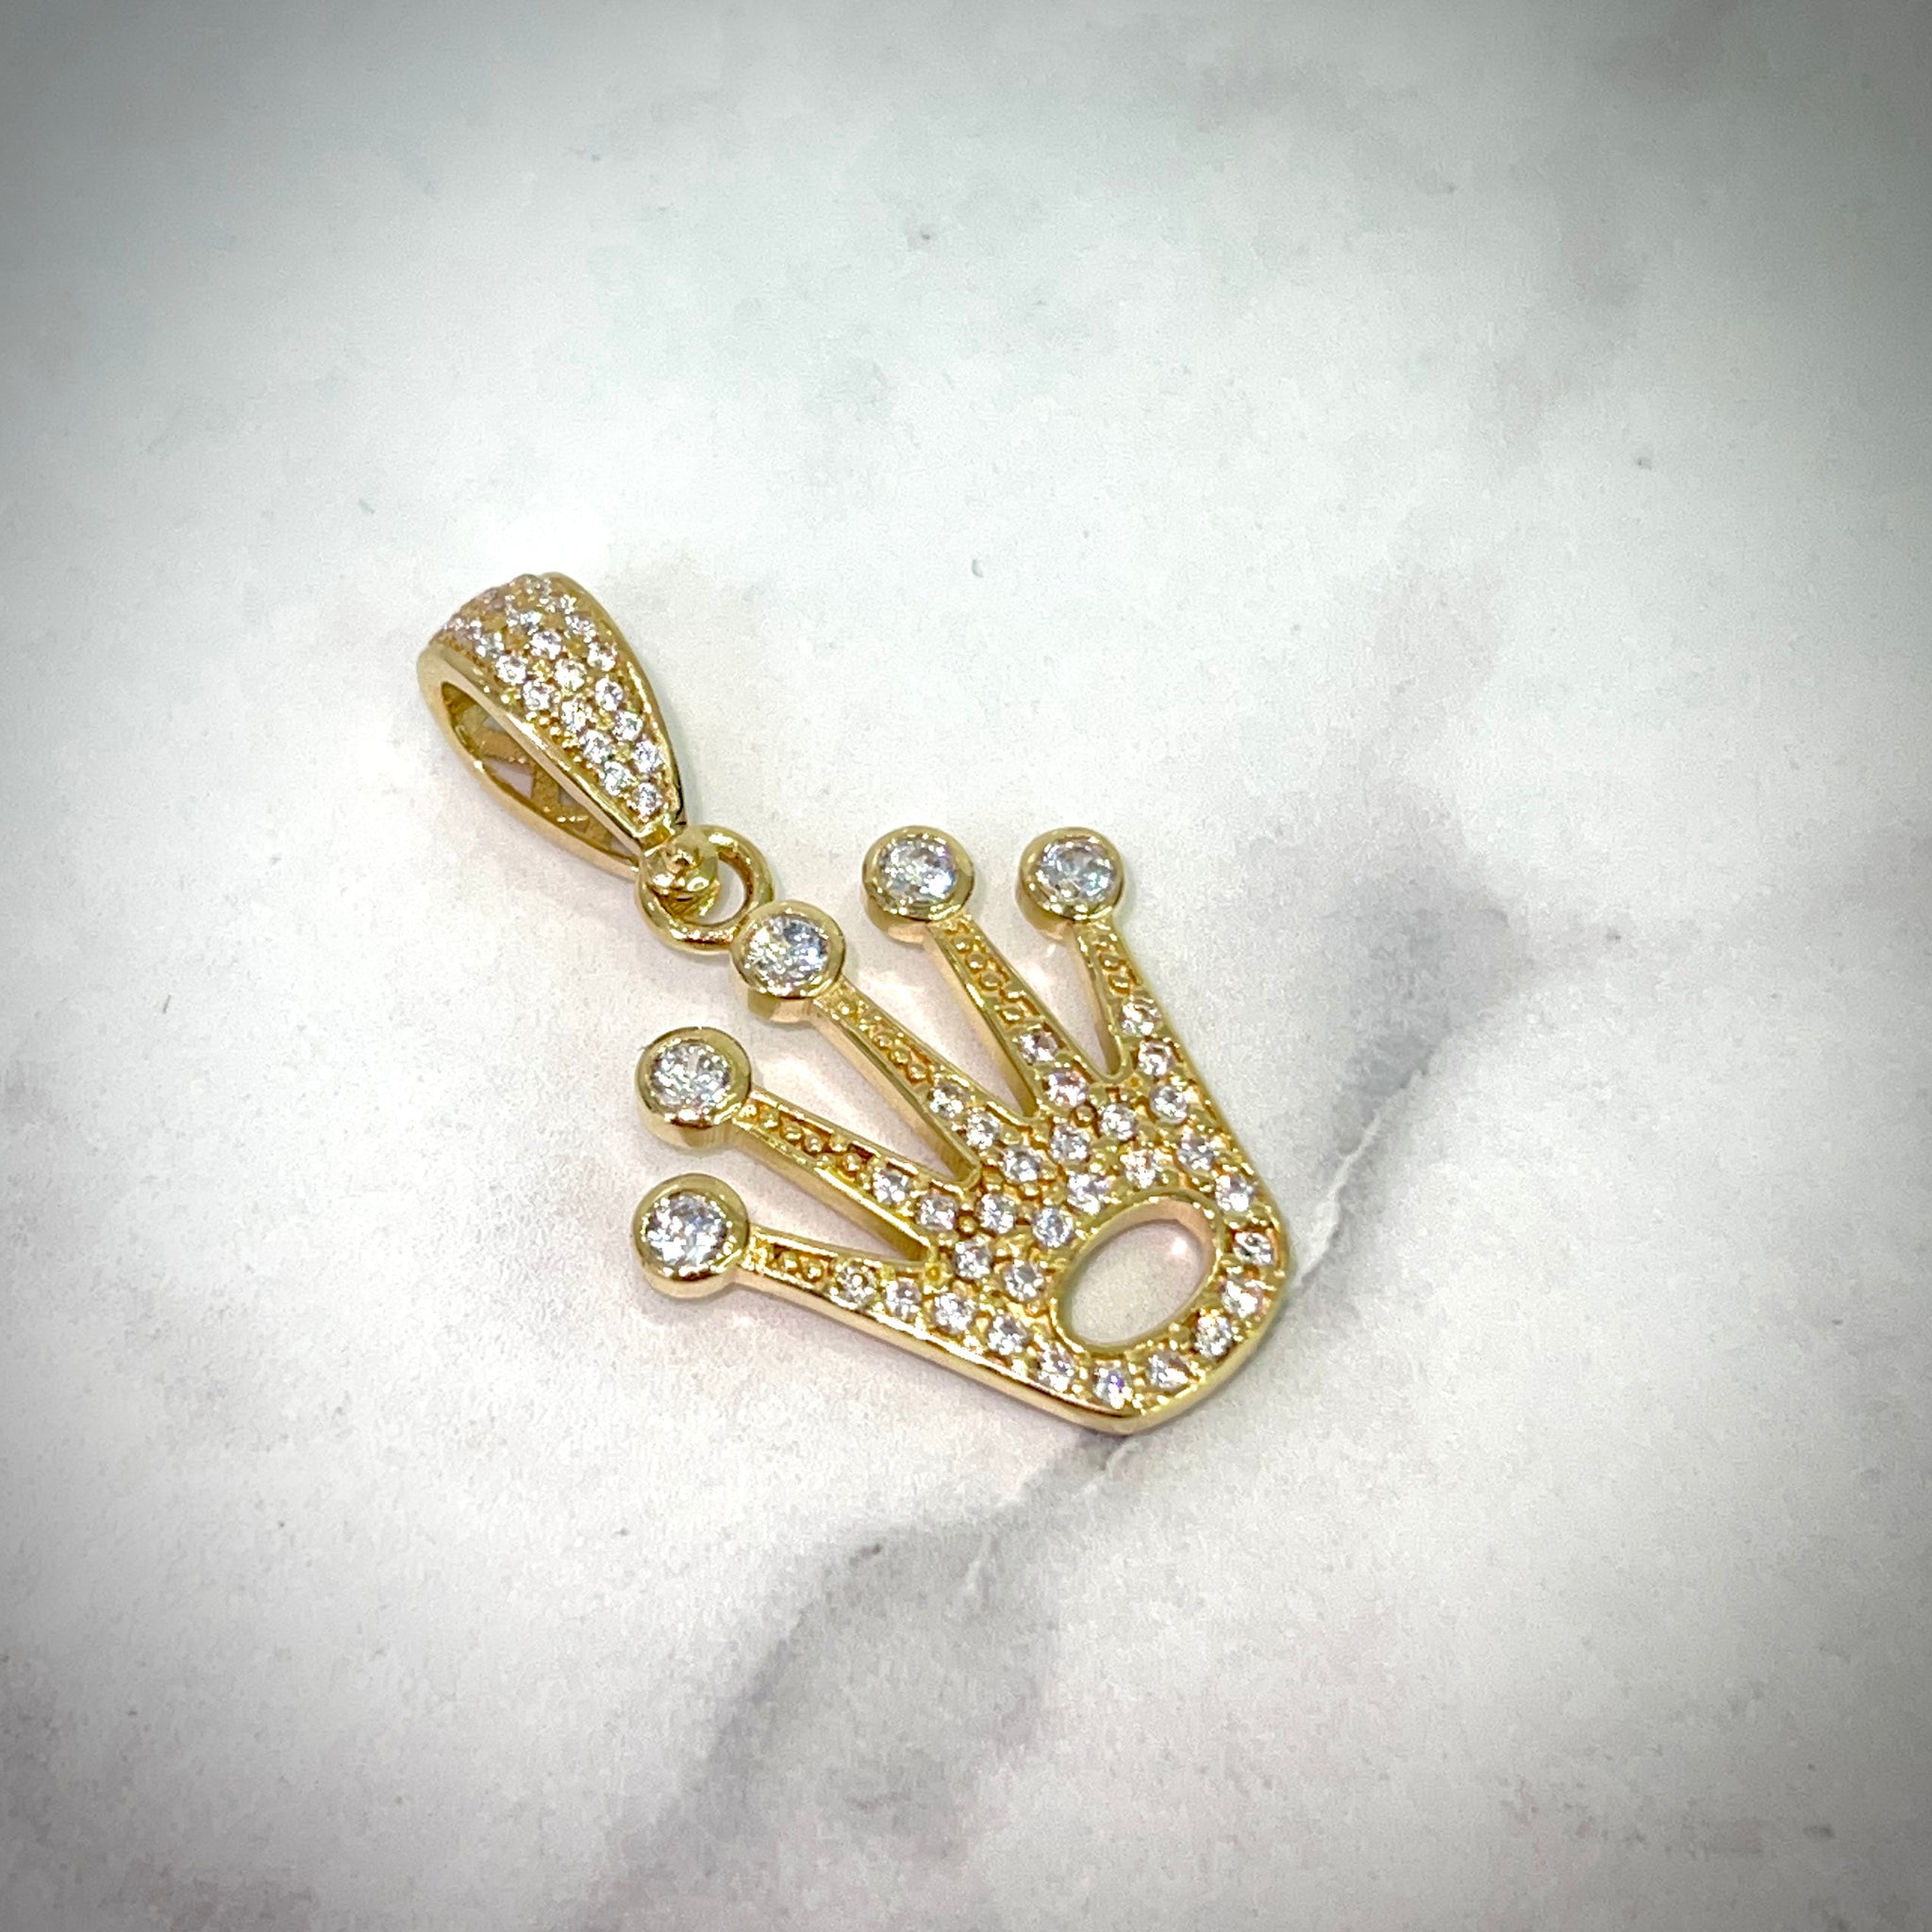 Crown Pendant "Iced Out"  - 18 carat gold